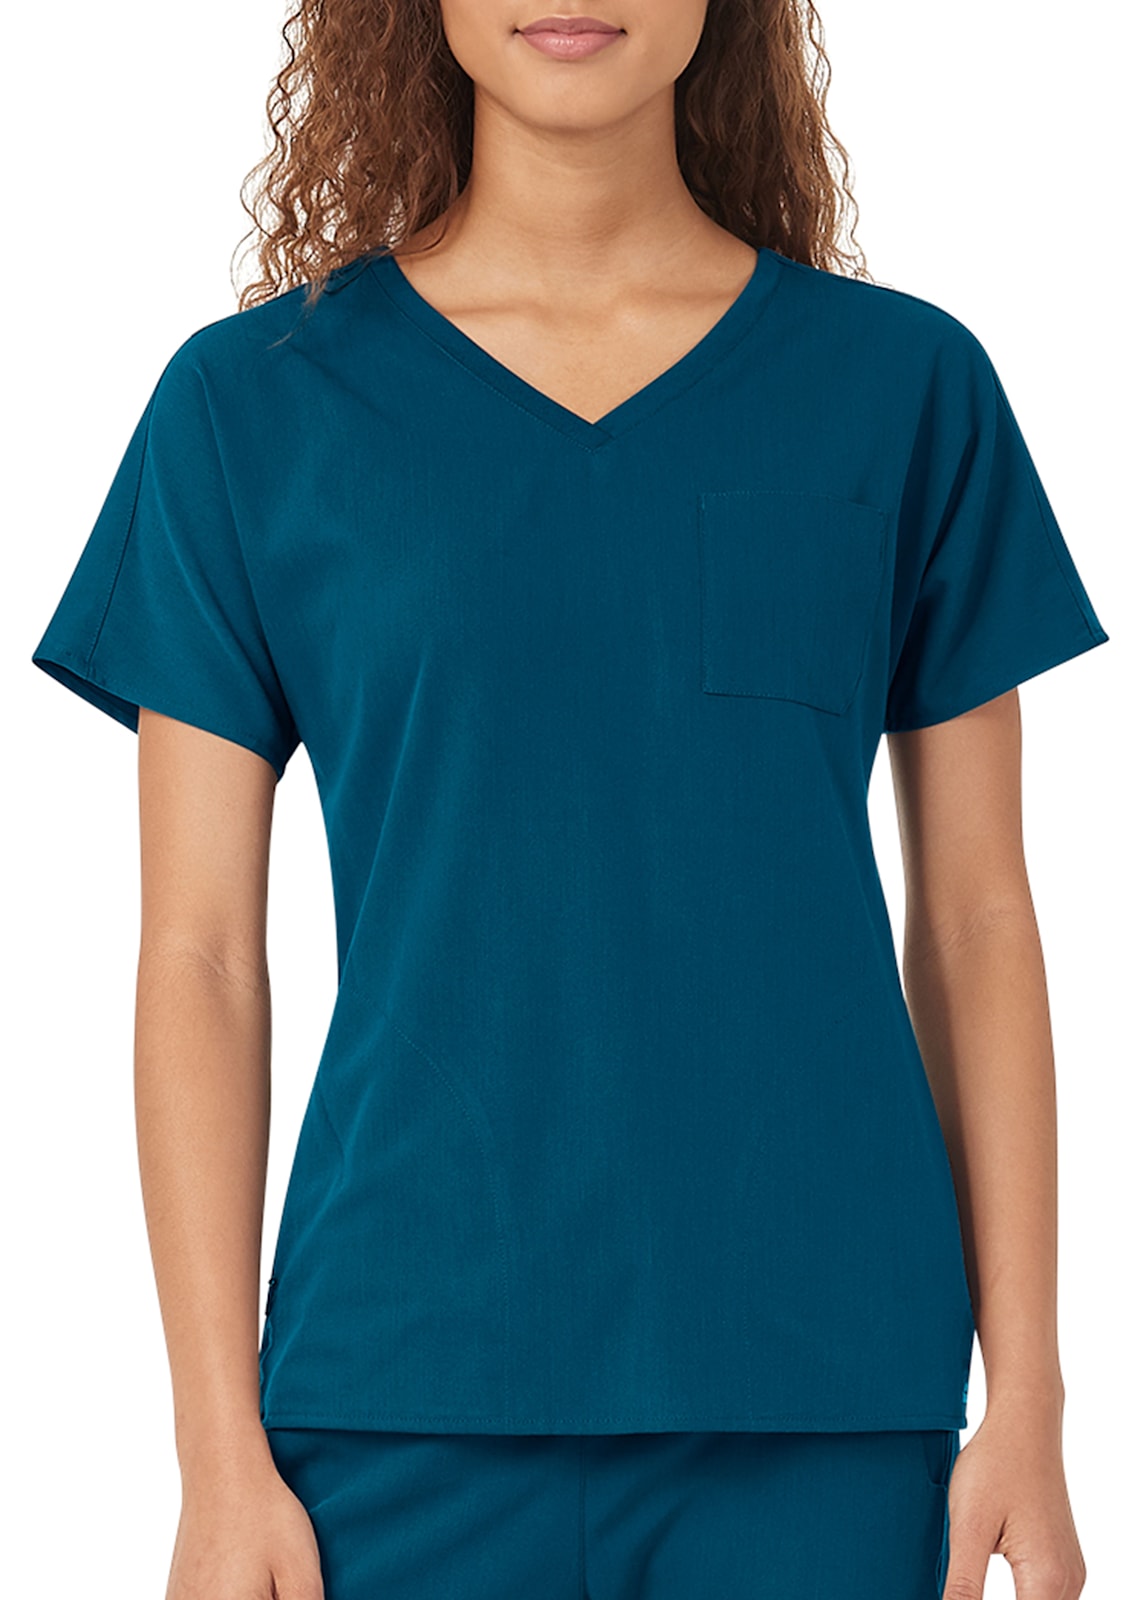 4 Pocket V-Neck Scrub Top with Perforated Panel